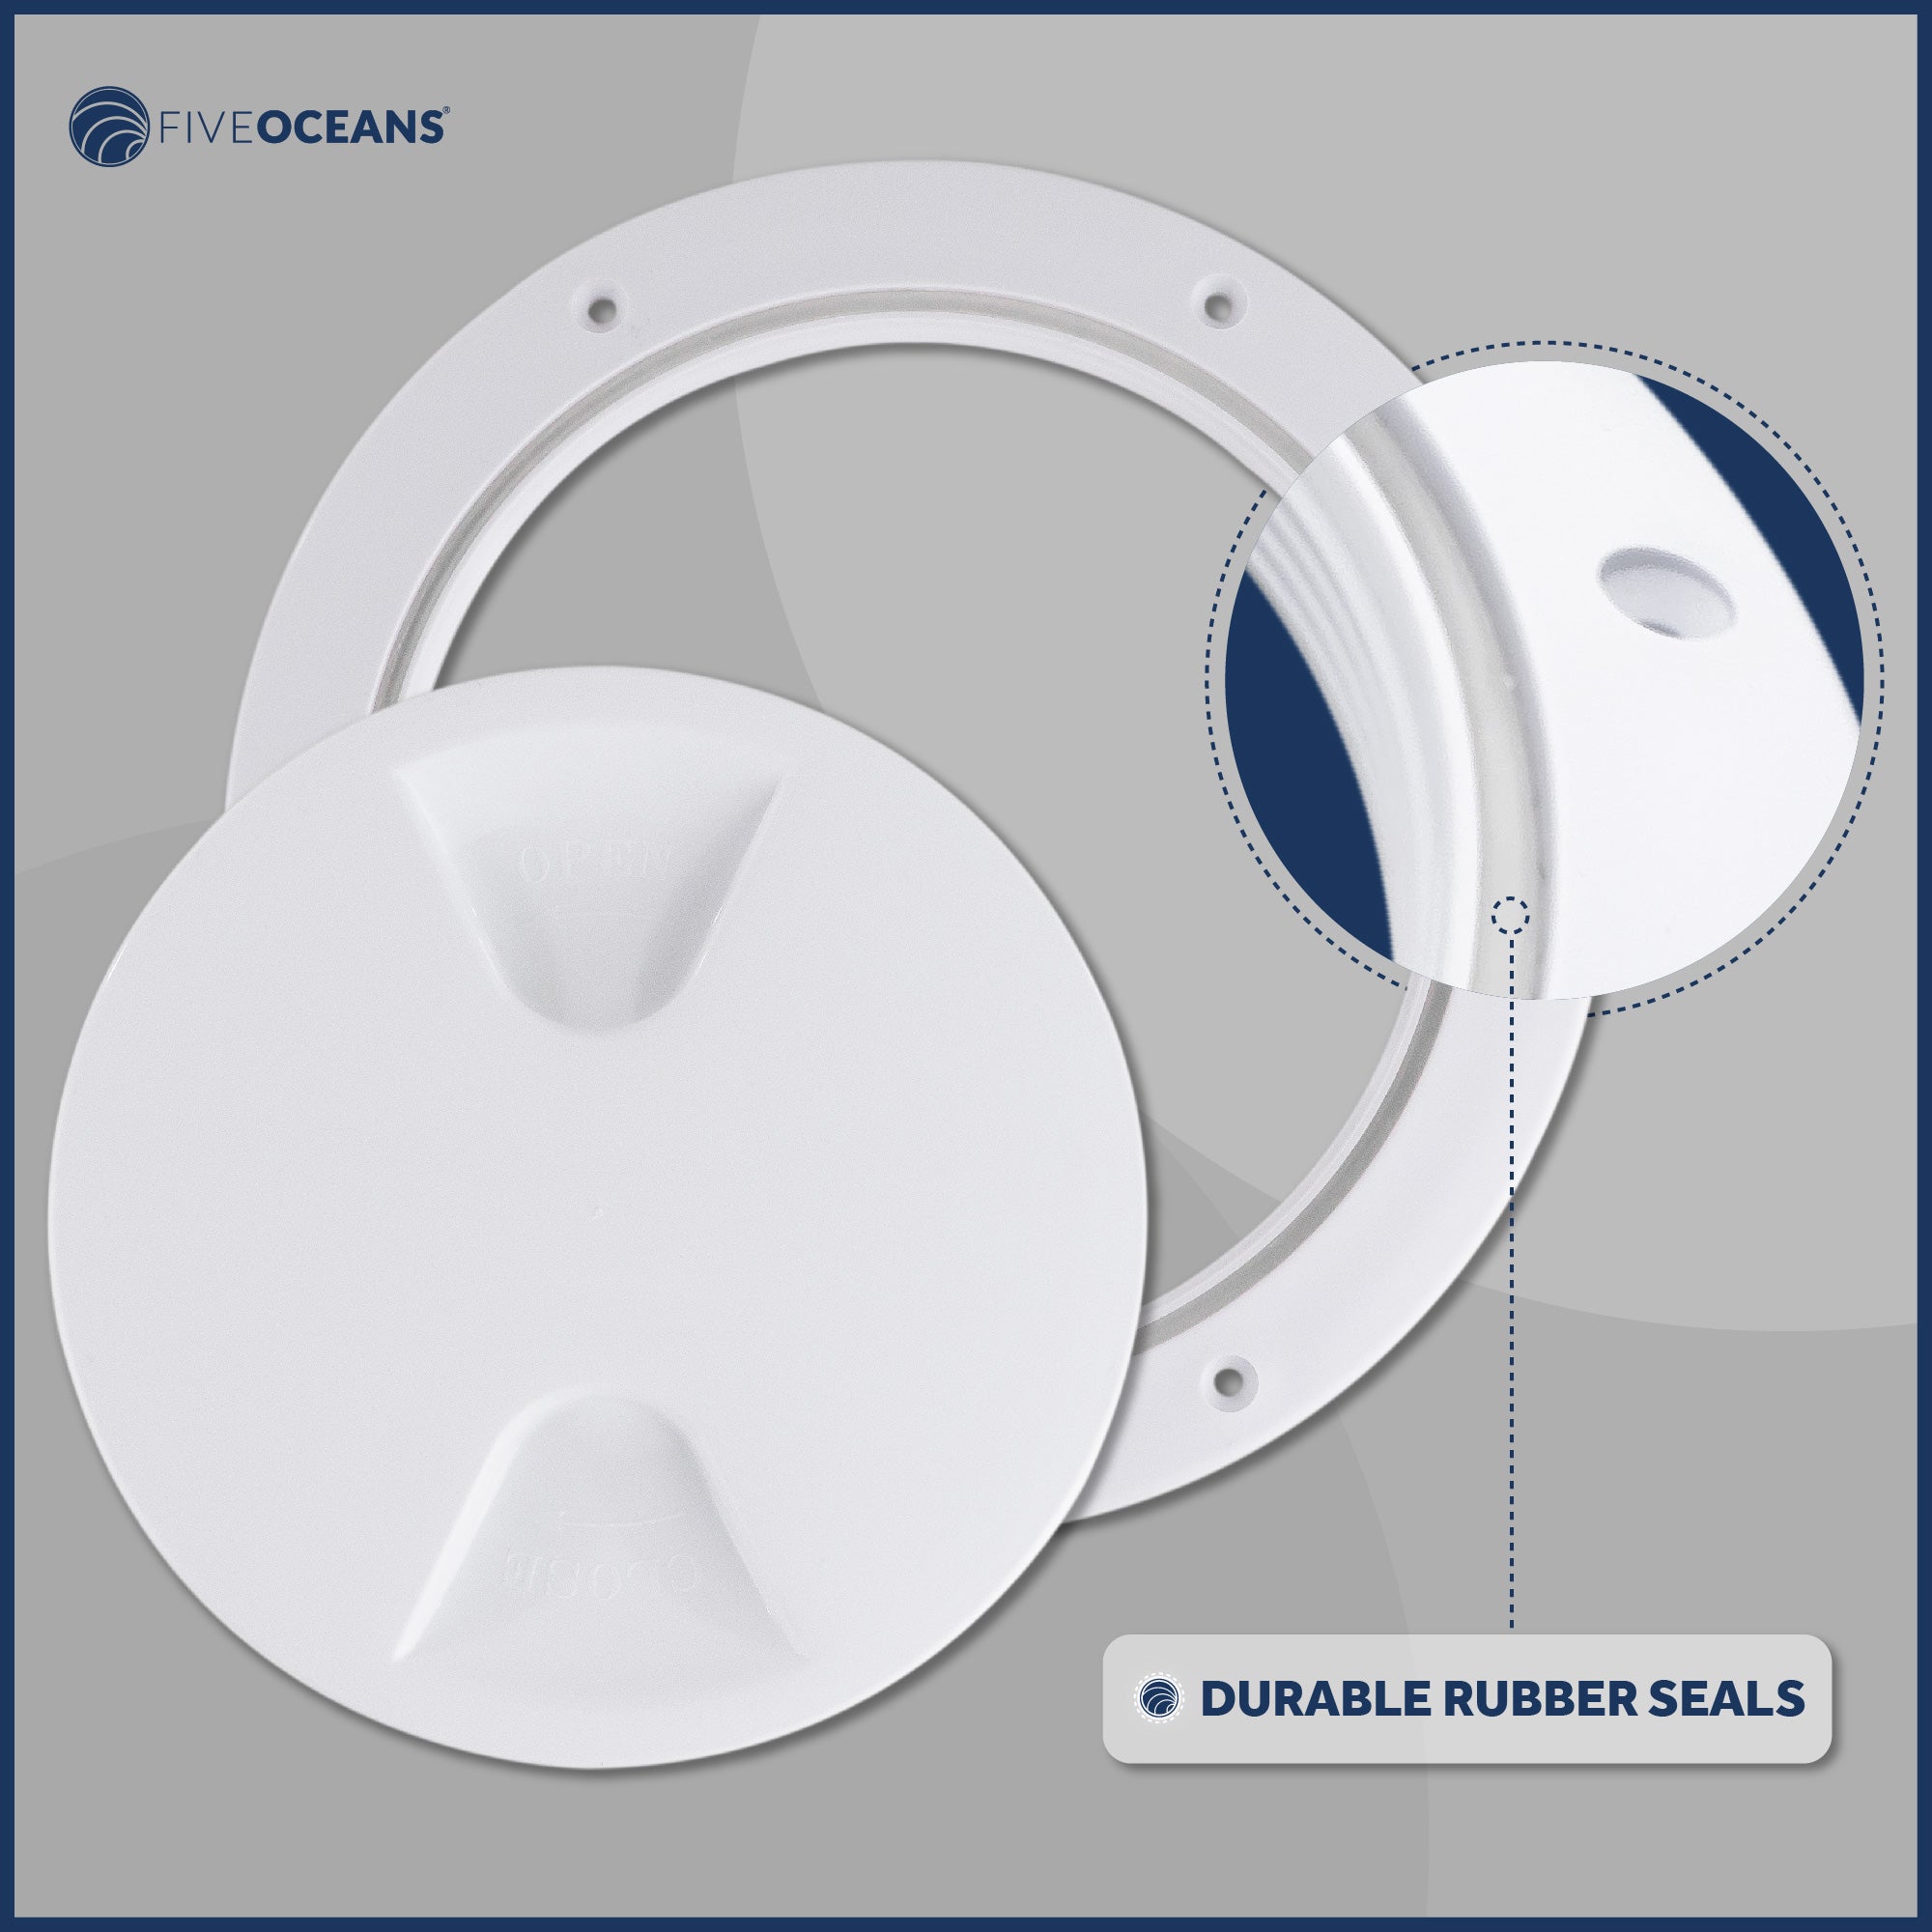 4" Deck Plate, Round, White 2-Pack - FO296-M2